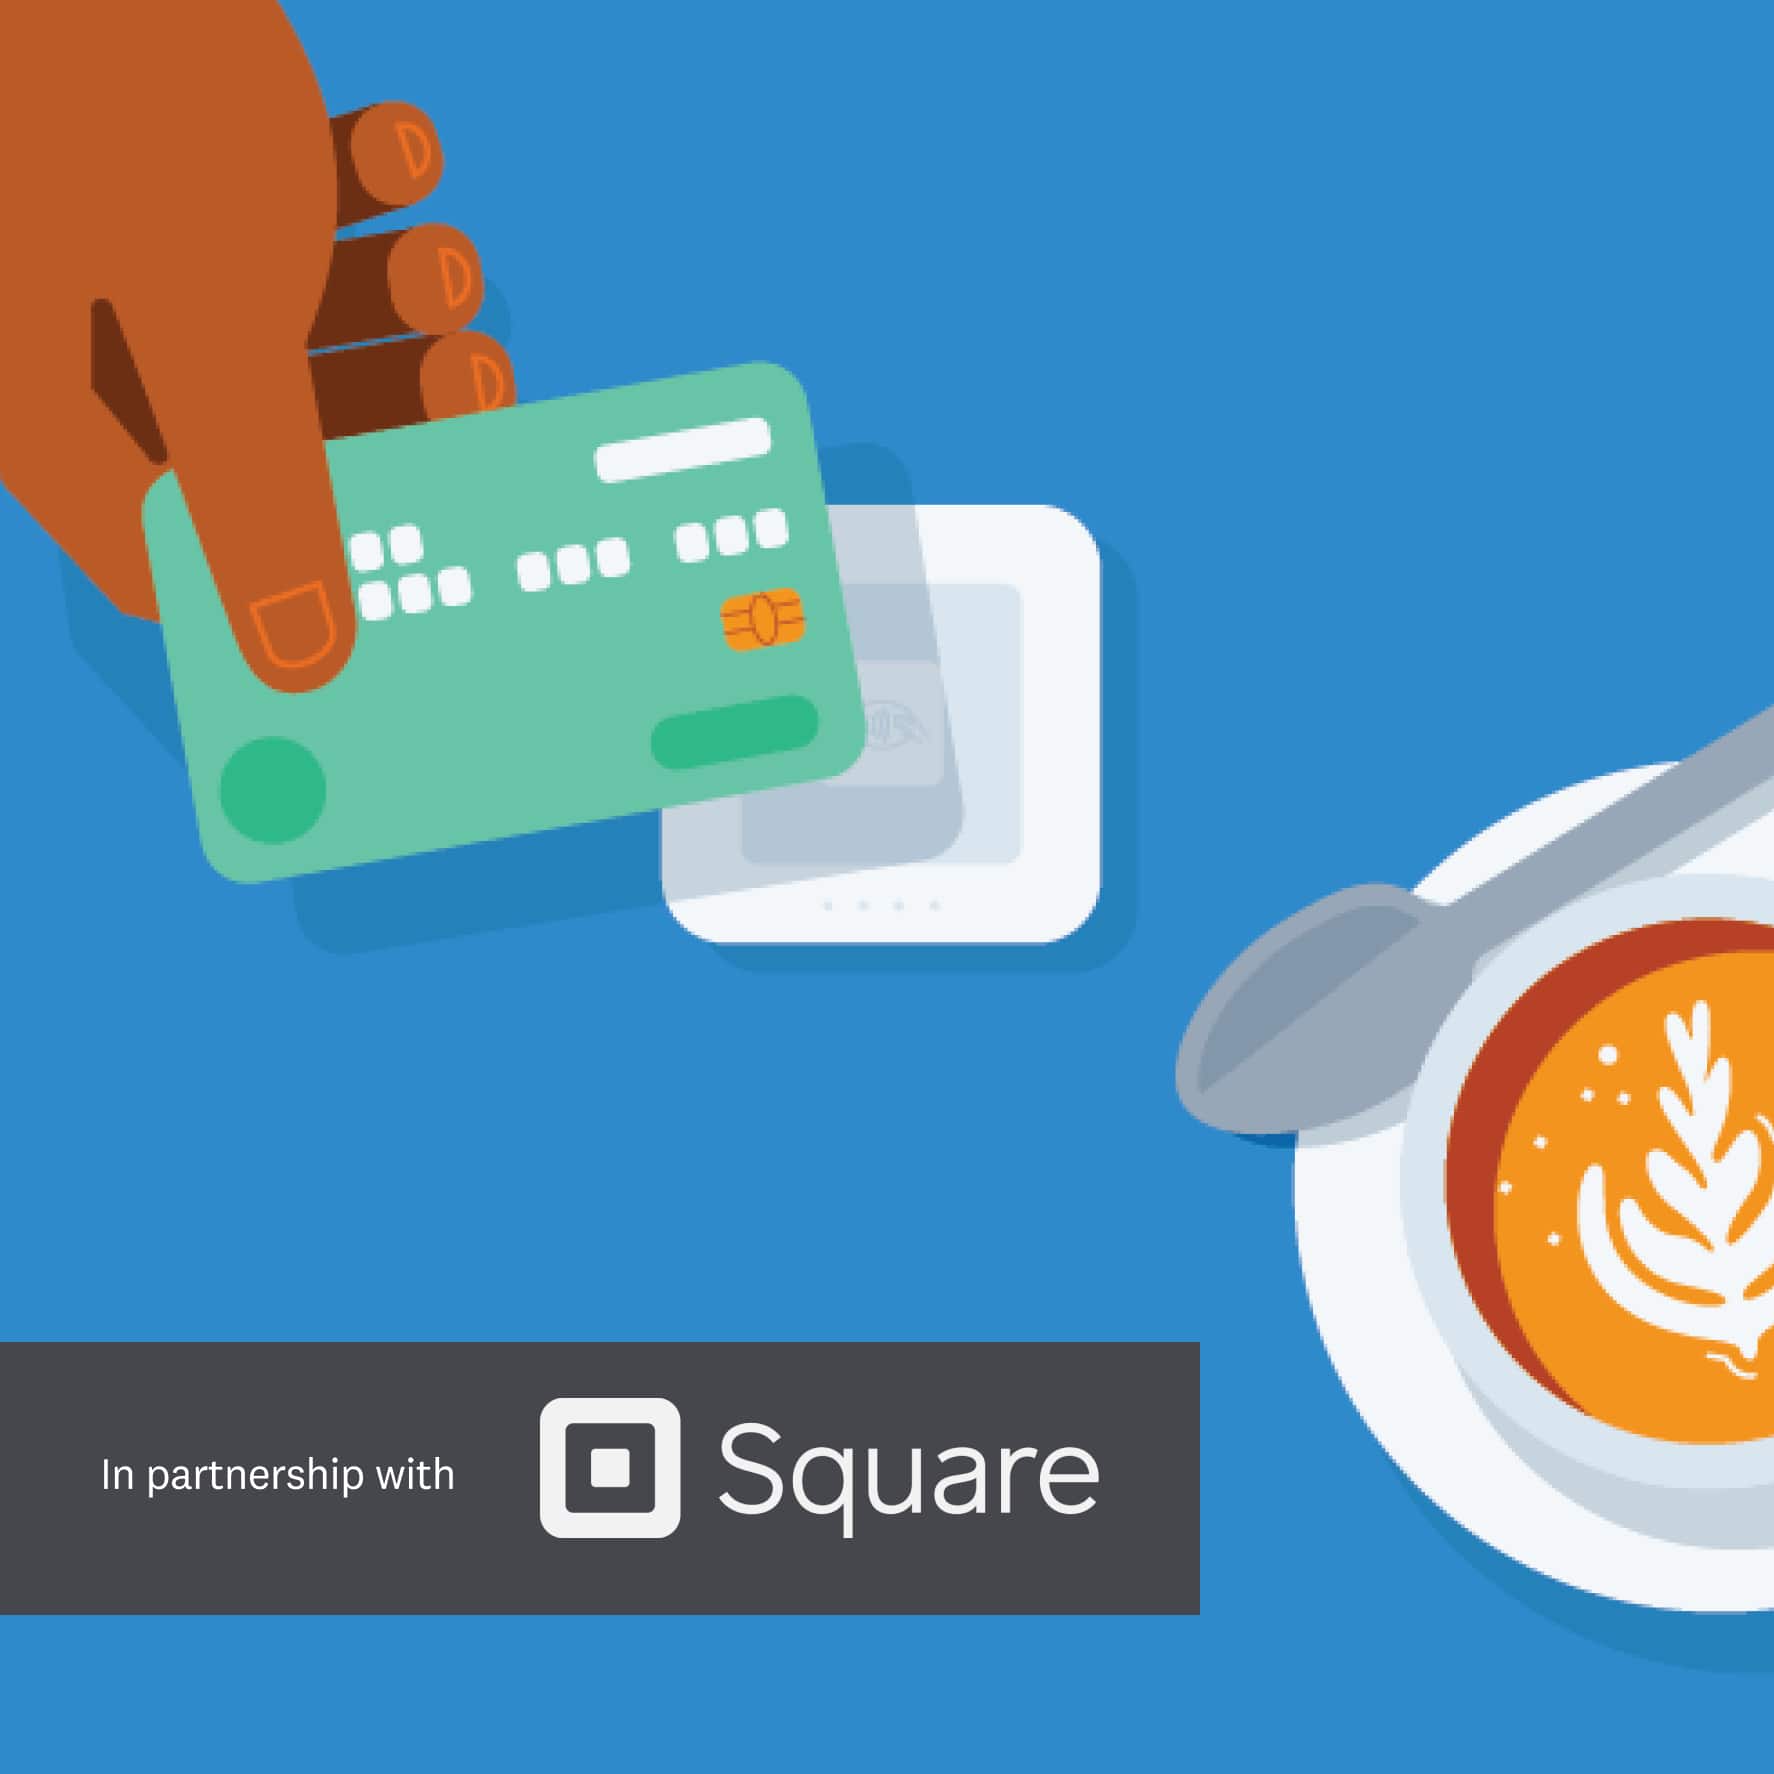 A hand making a contactless credit card payment, with the logo "In partnership with Square"